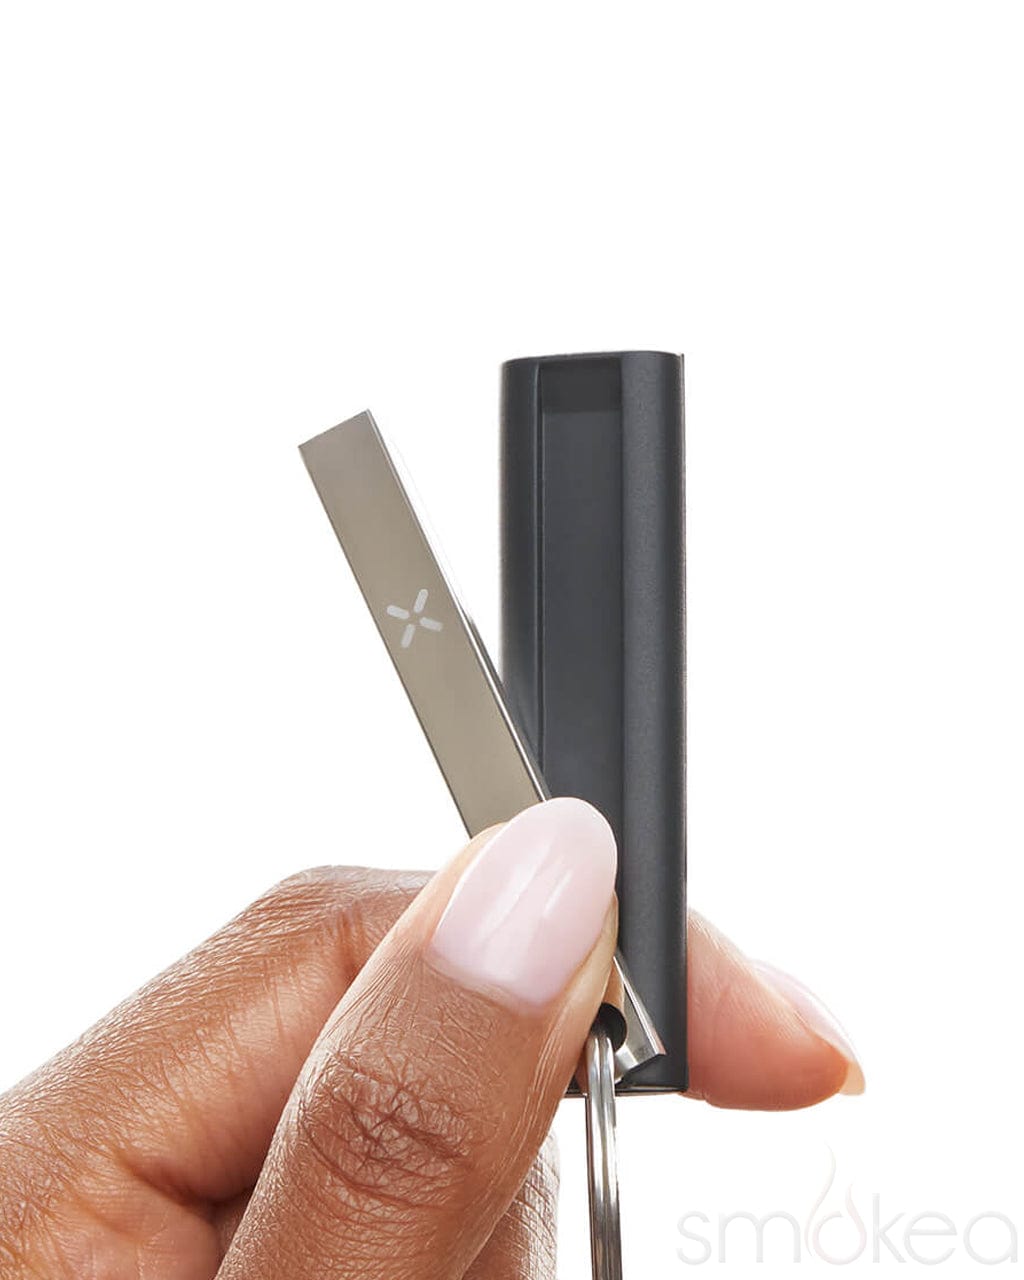 Multi-Tool for PAX and other vaporizers